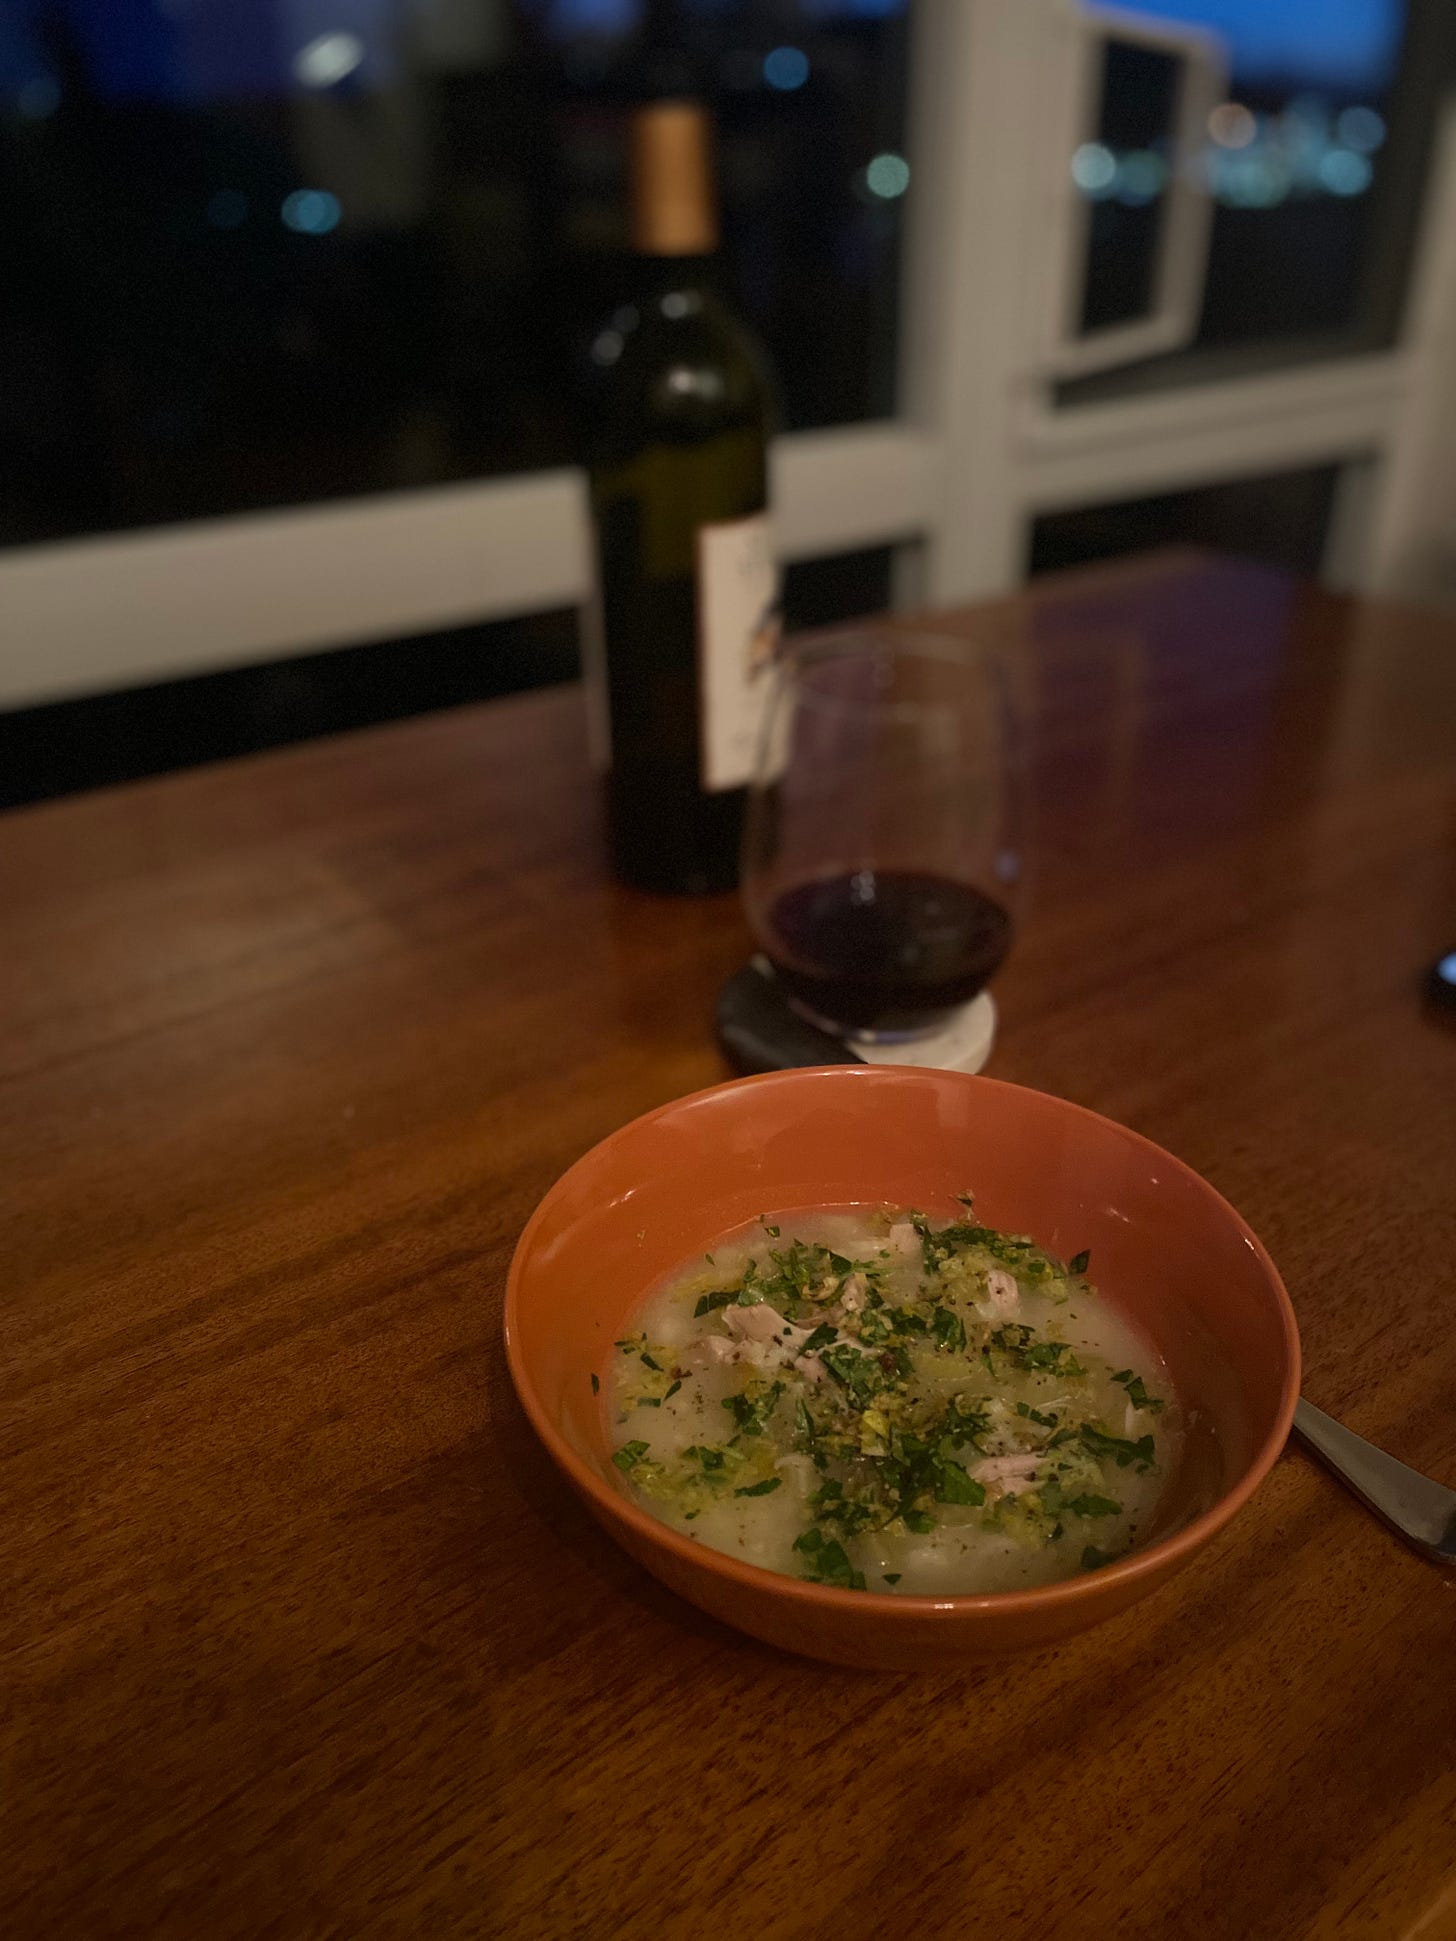 An orange bowl of the soup described above, with gremolata scattered overtop. In the background is a bottle of wine, and a glass of red wine on a coaster in front of the window.